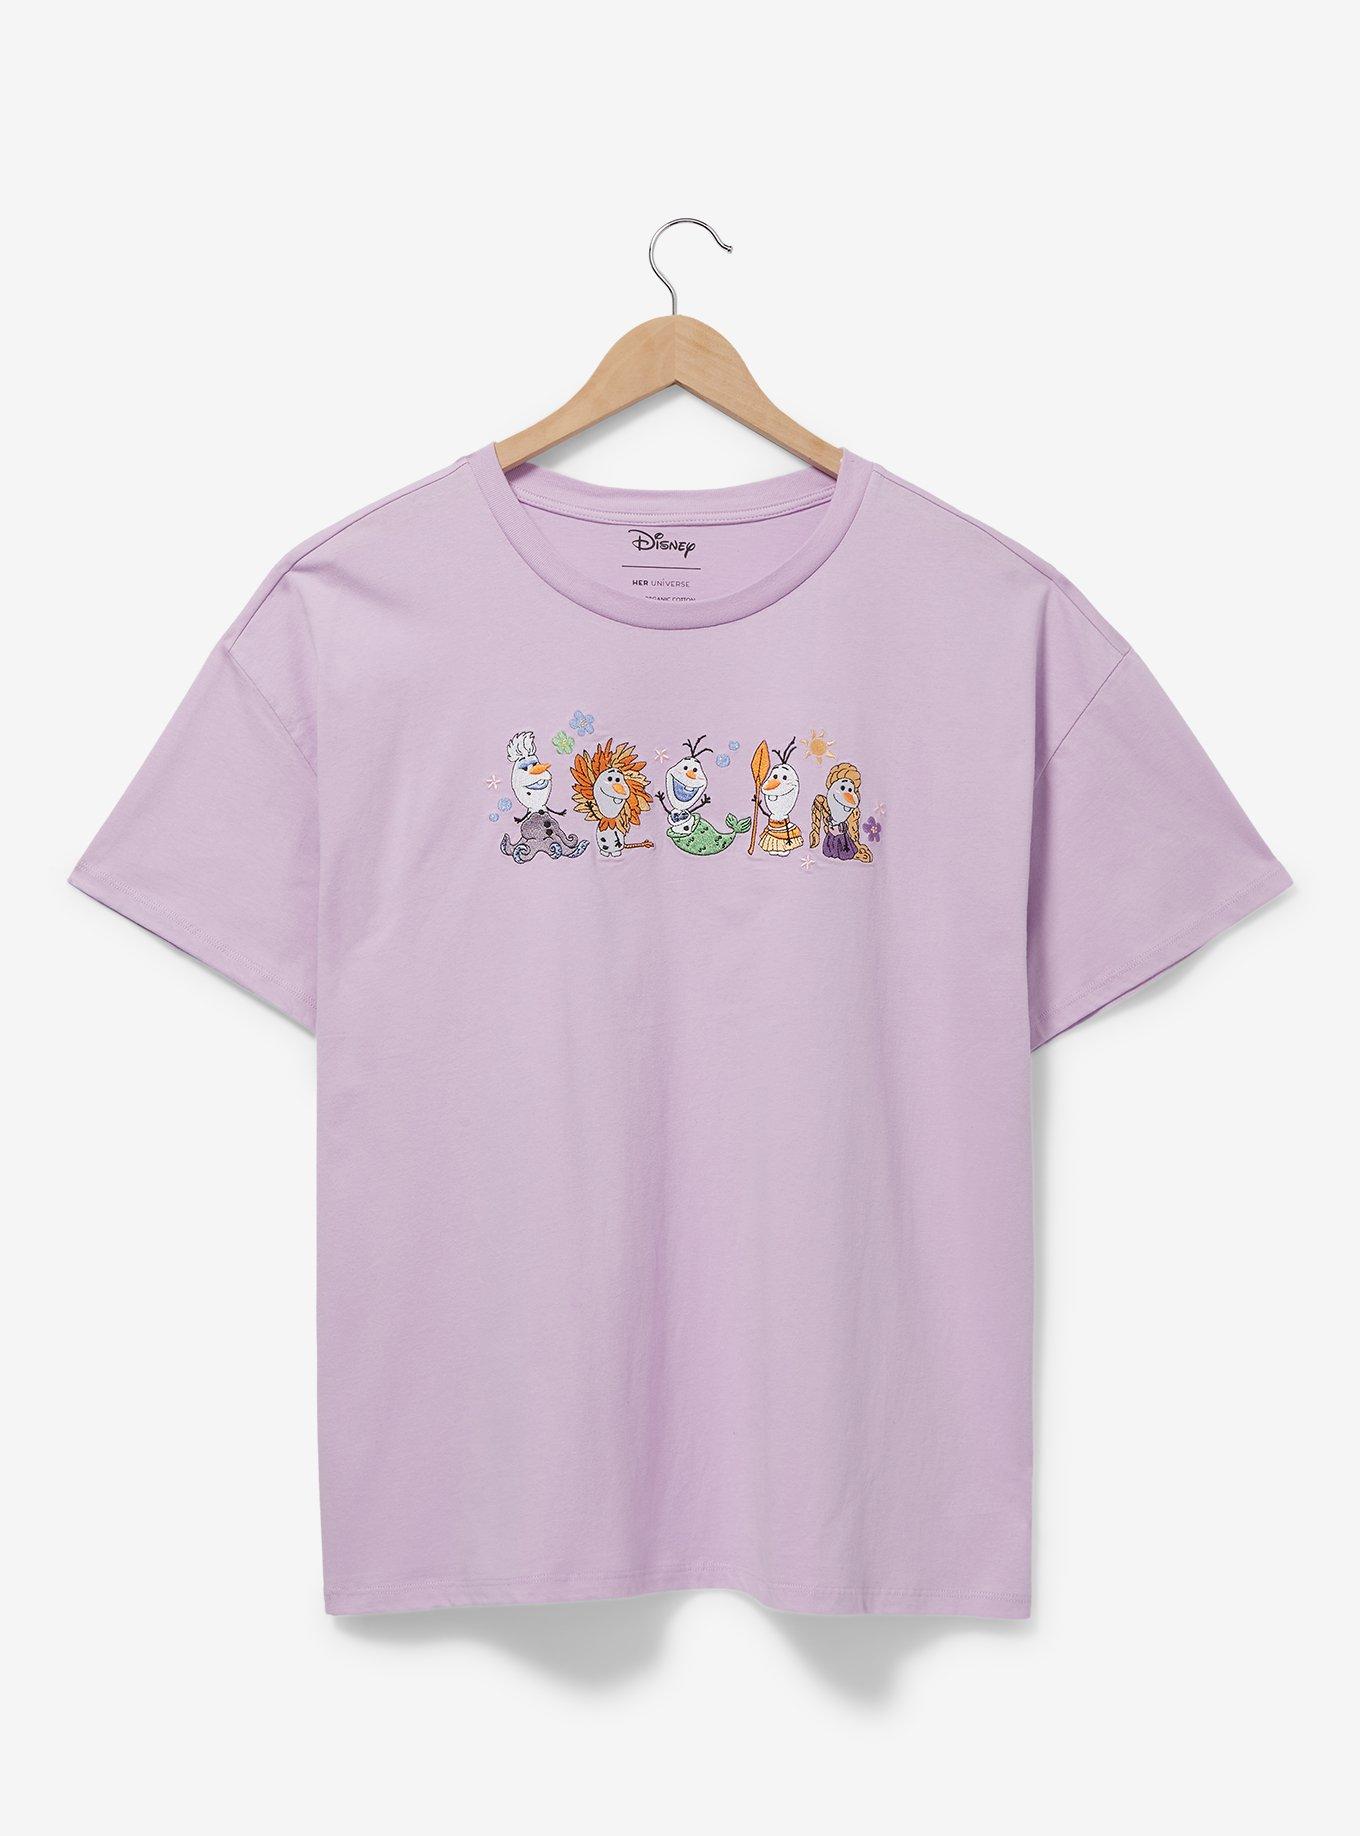 Disney Frozen Olaf Dress-Up Women's T-Shirt - BoxLunch Exclusive, LILAC, hi-res